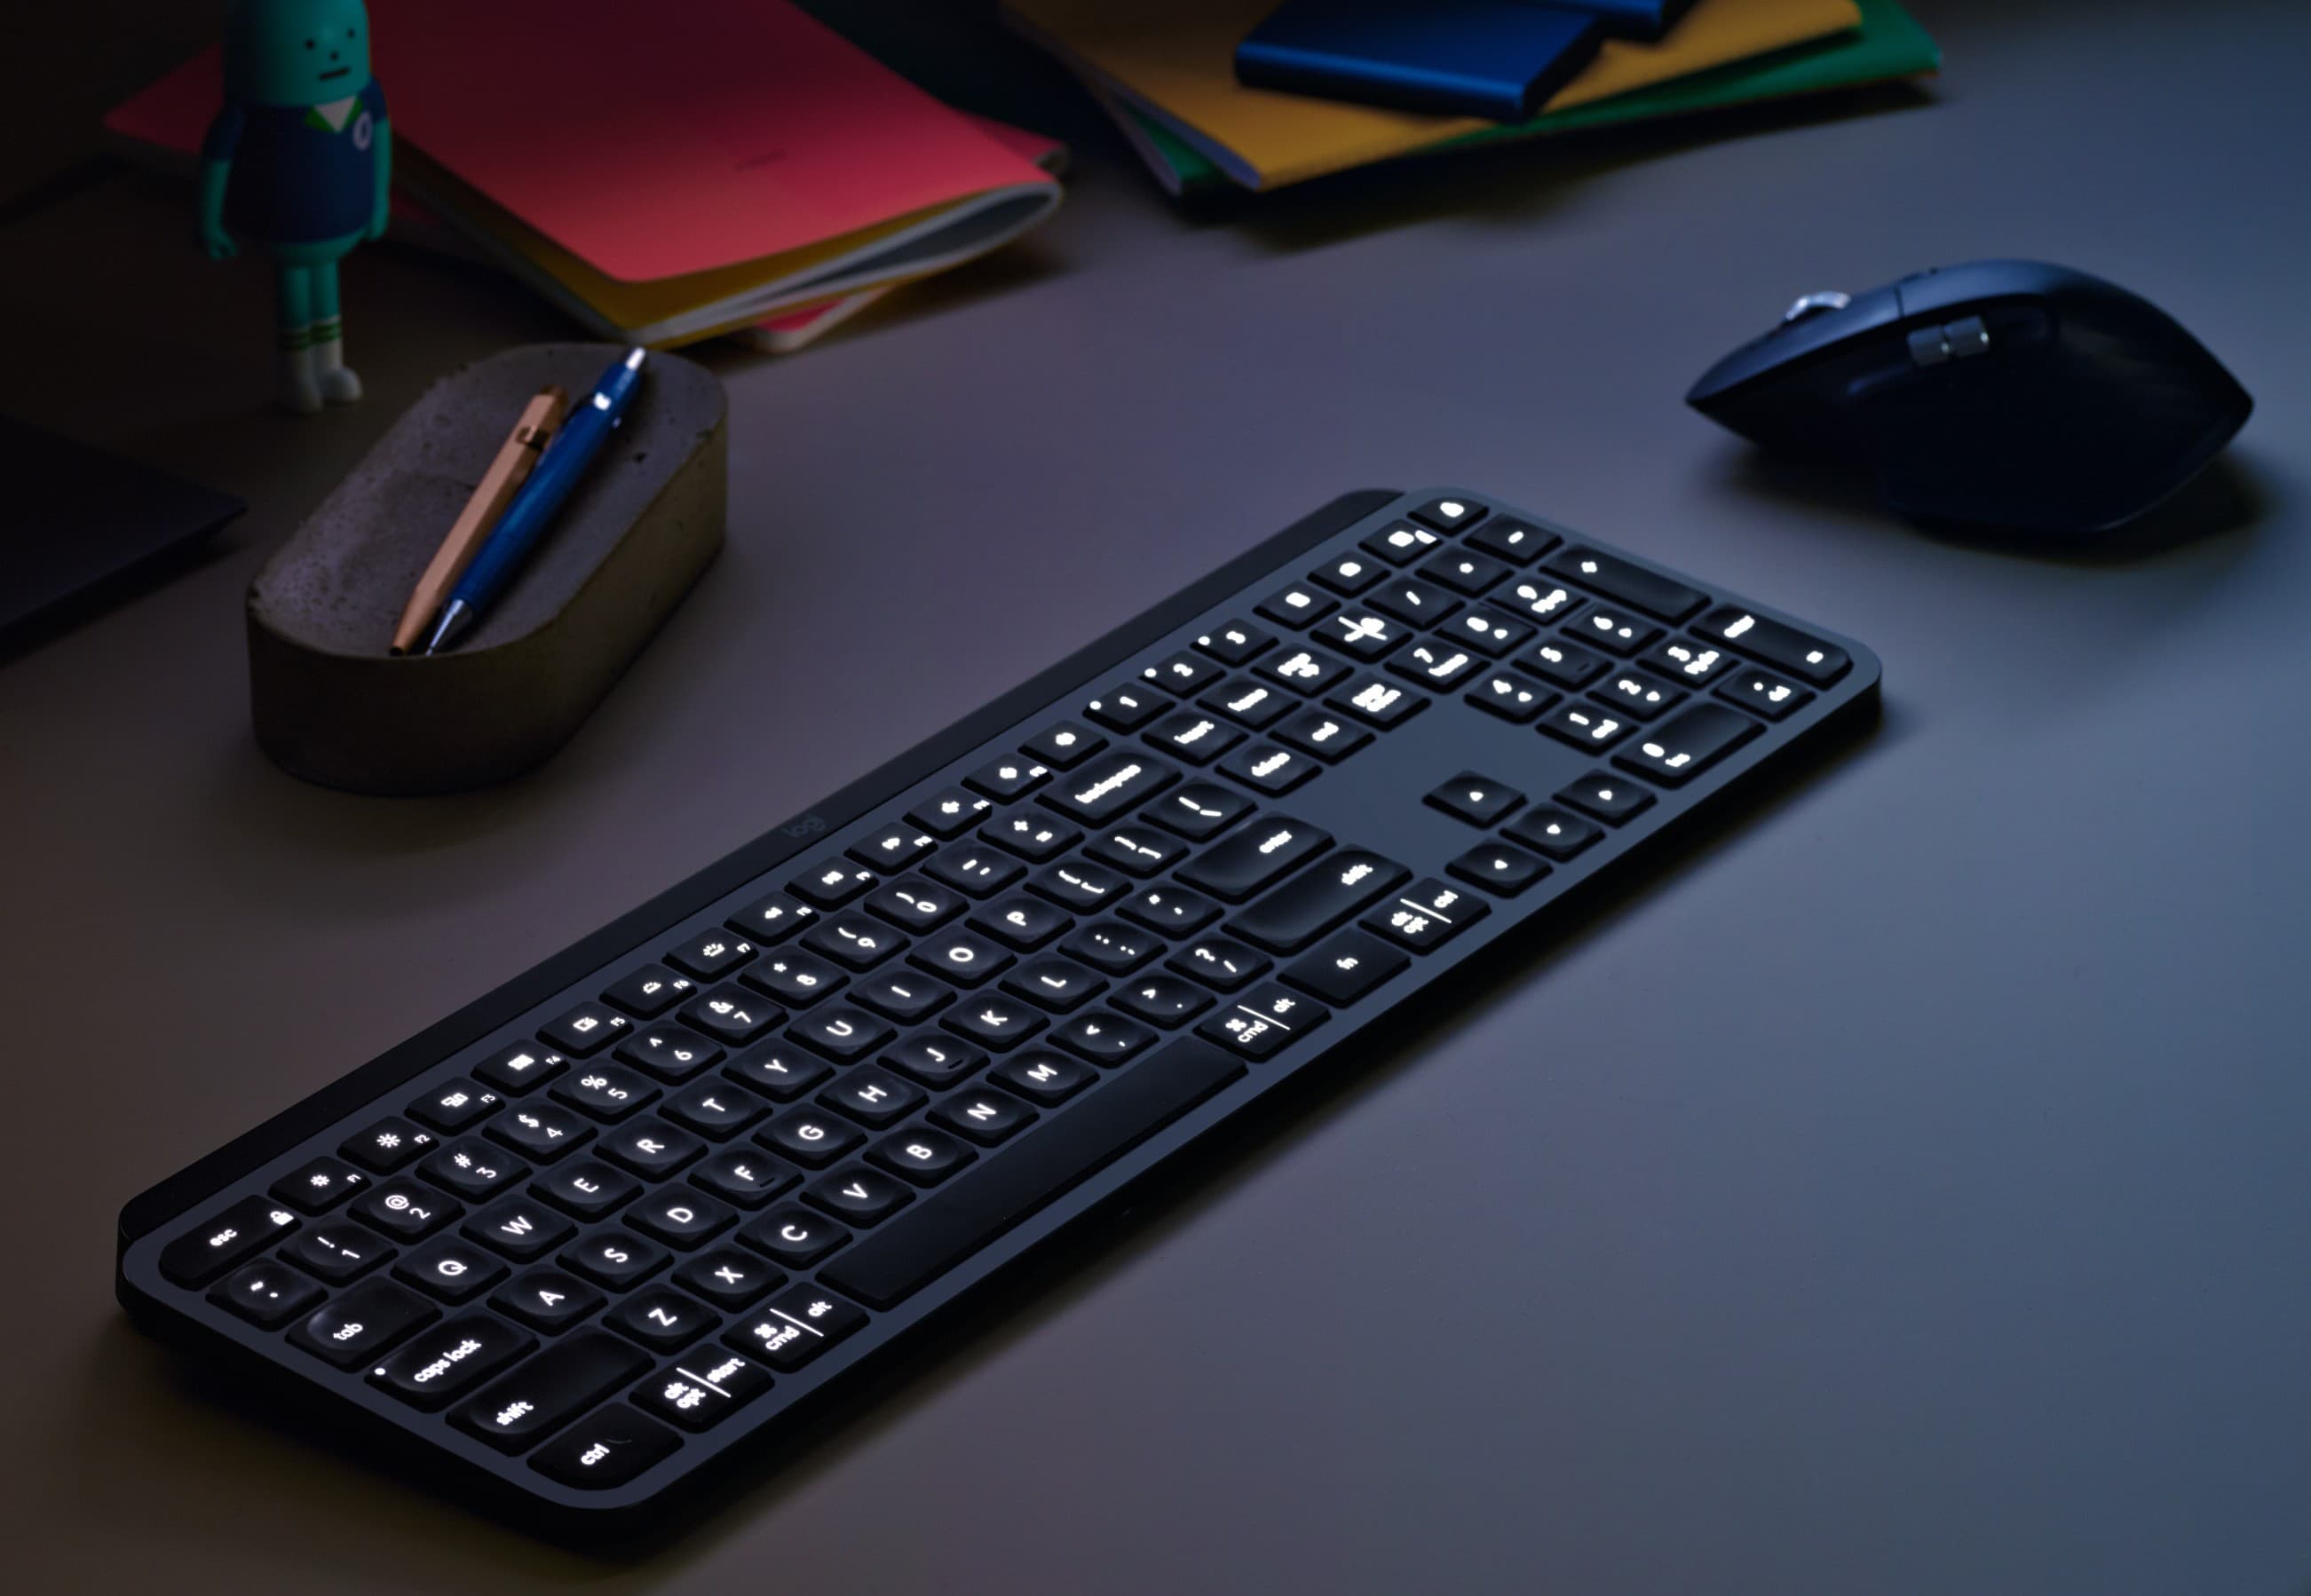 Make your work-from-home setup more comfortable with a solid keyboard and mouse like the Logitech MX Keys and MX Master 3.